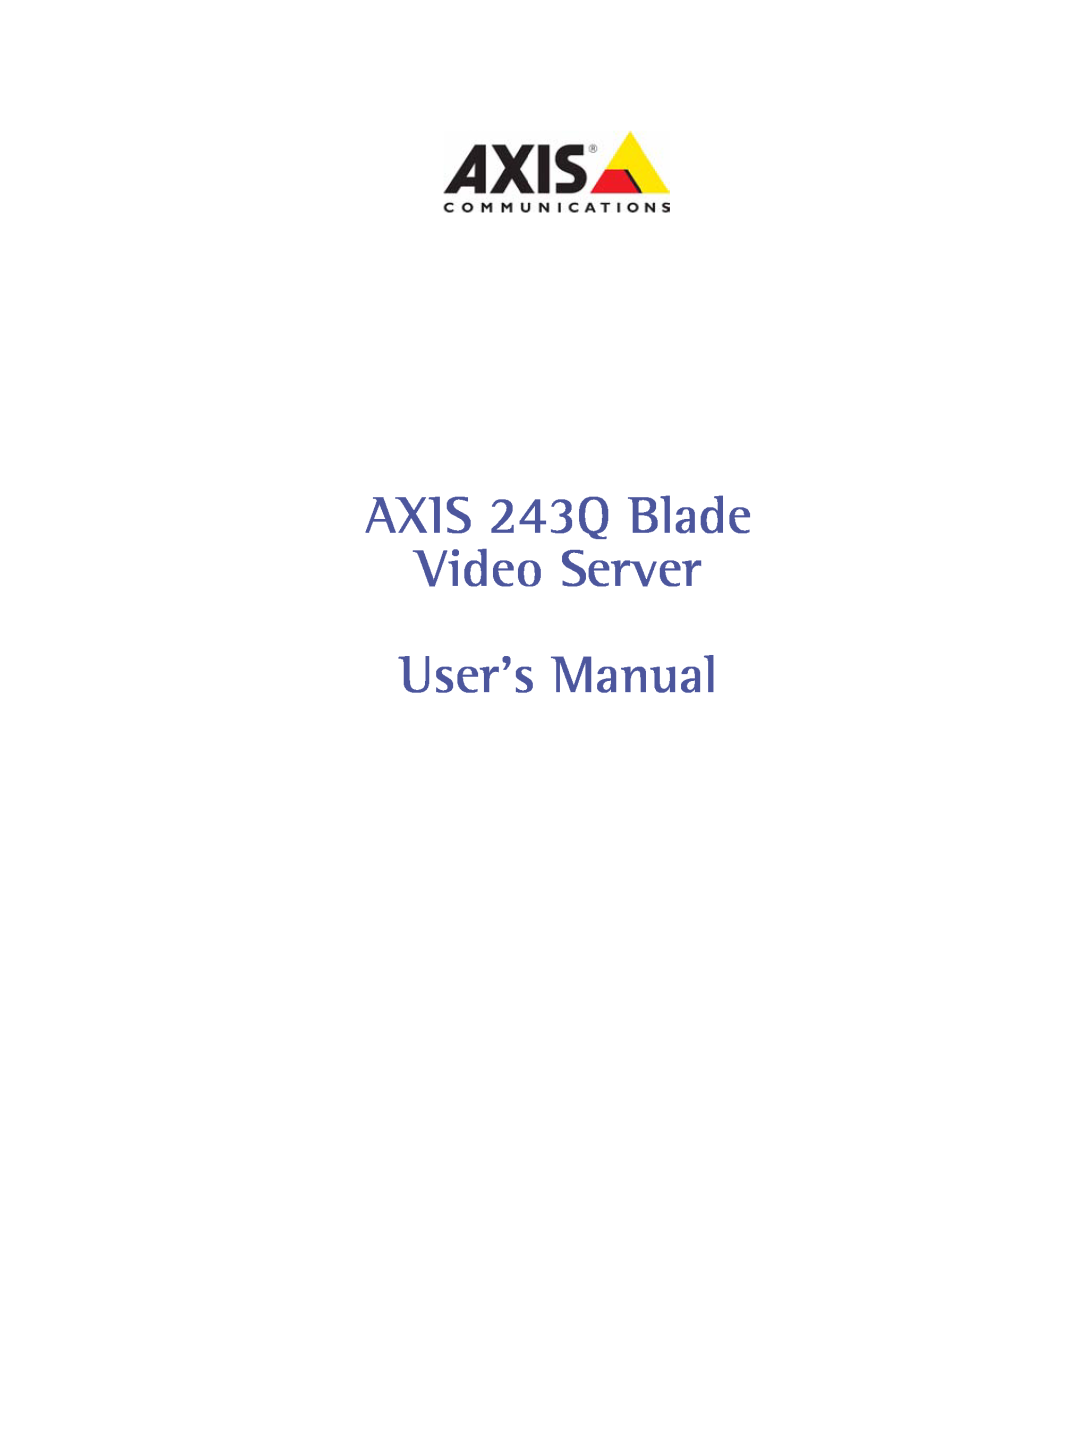 Axis Communications user manual AXIS 243Q Blade Video Server User’s Manual 